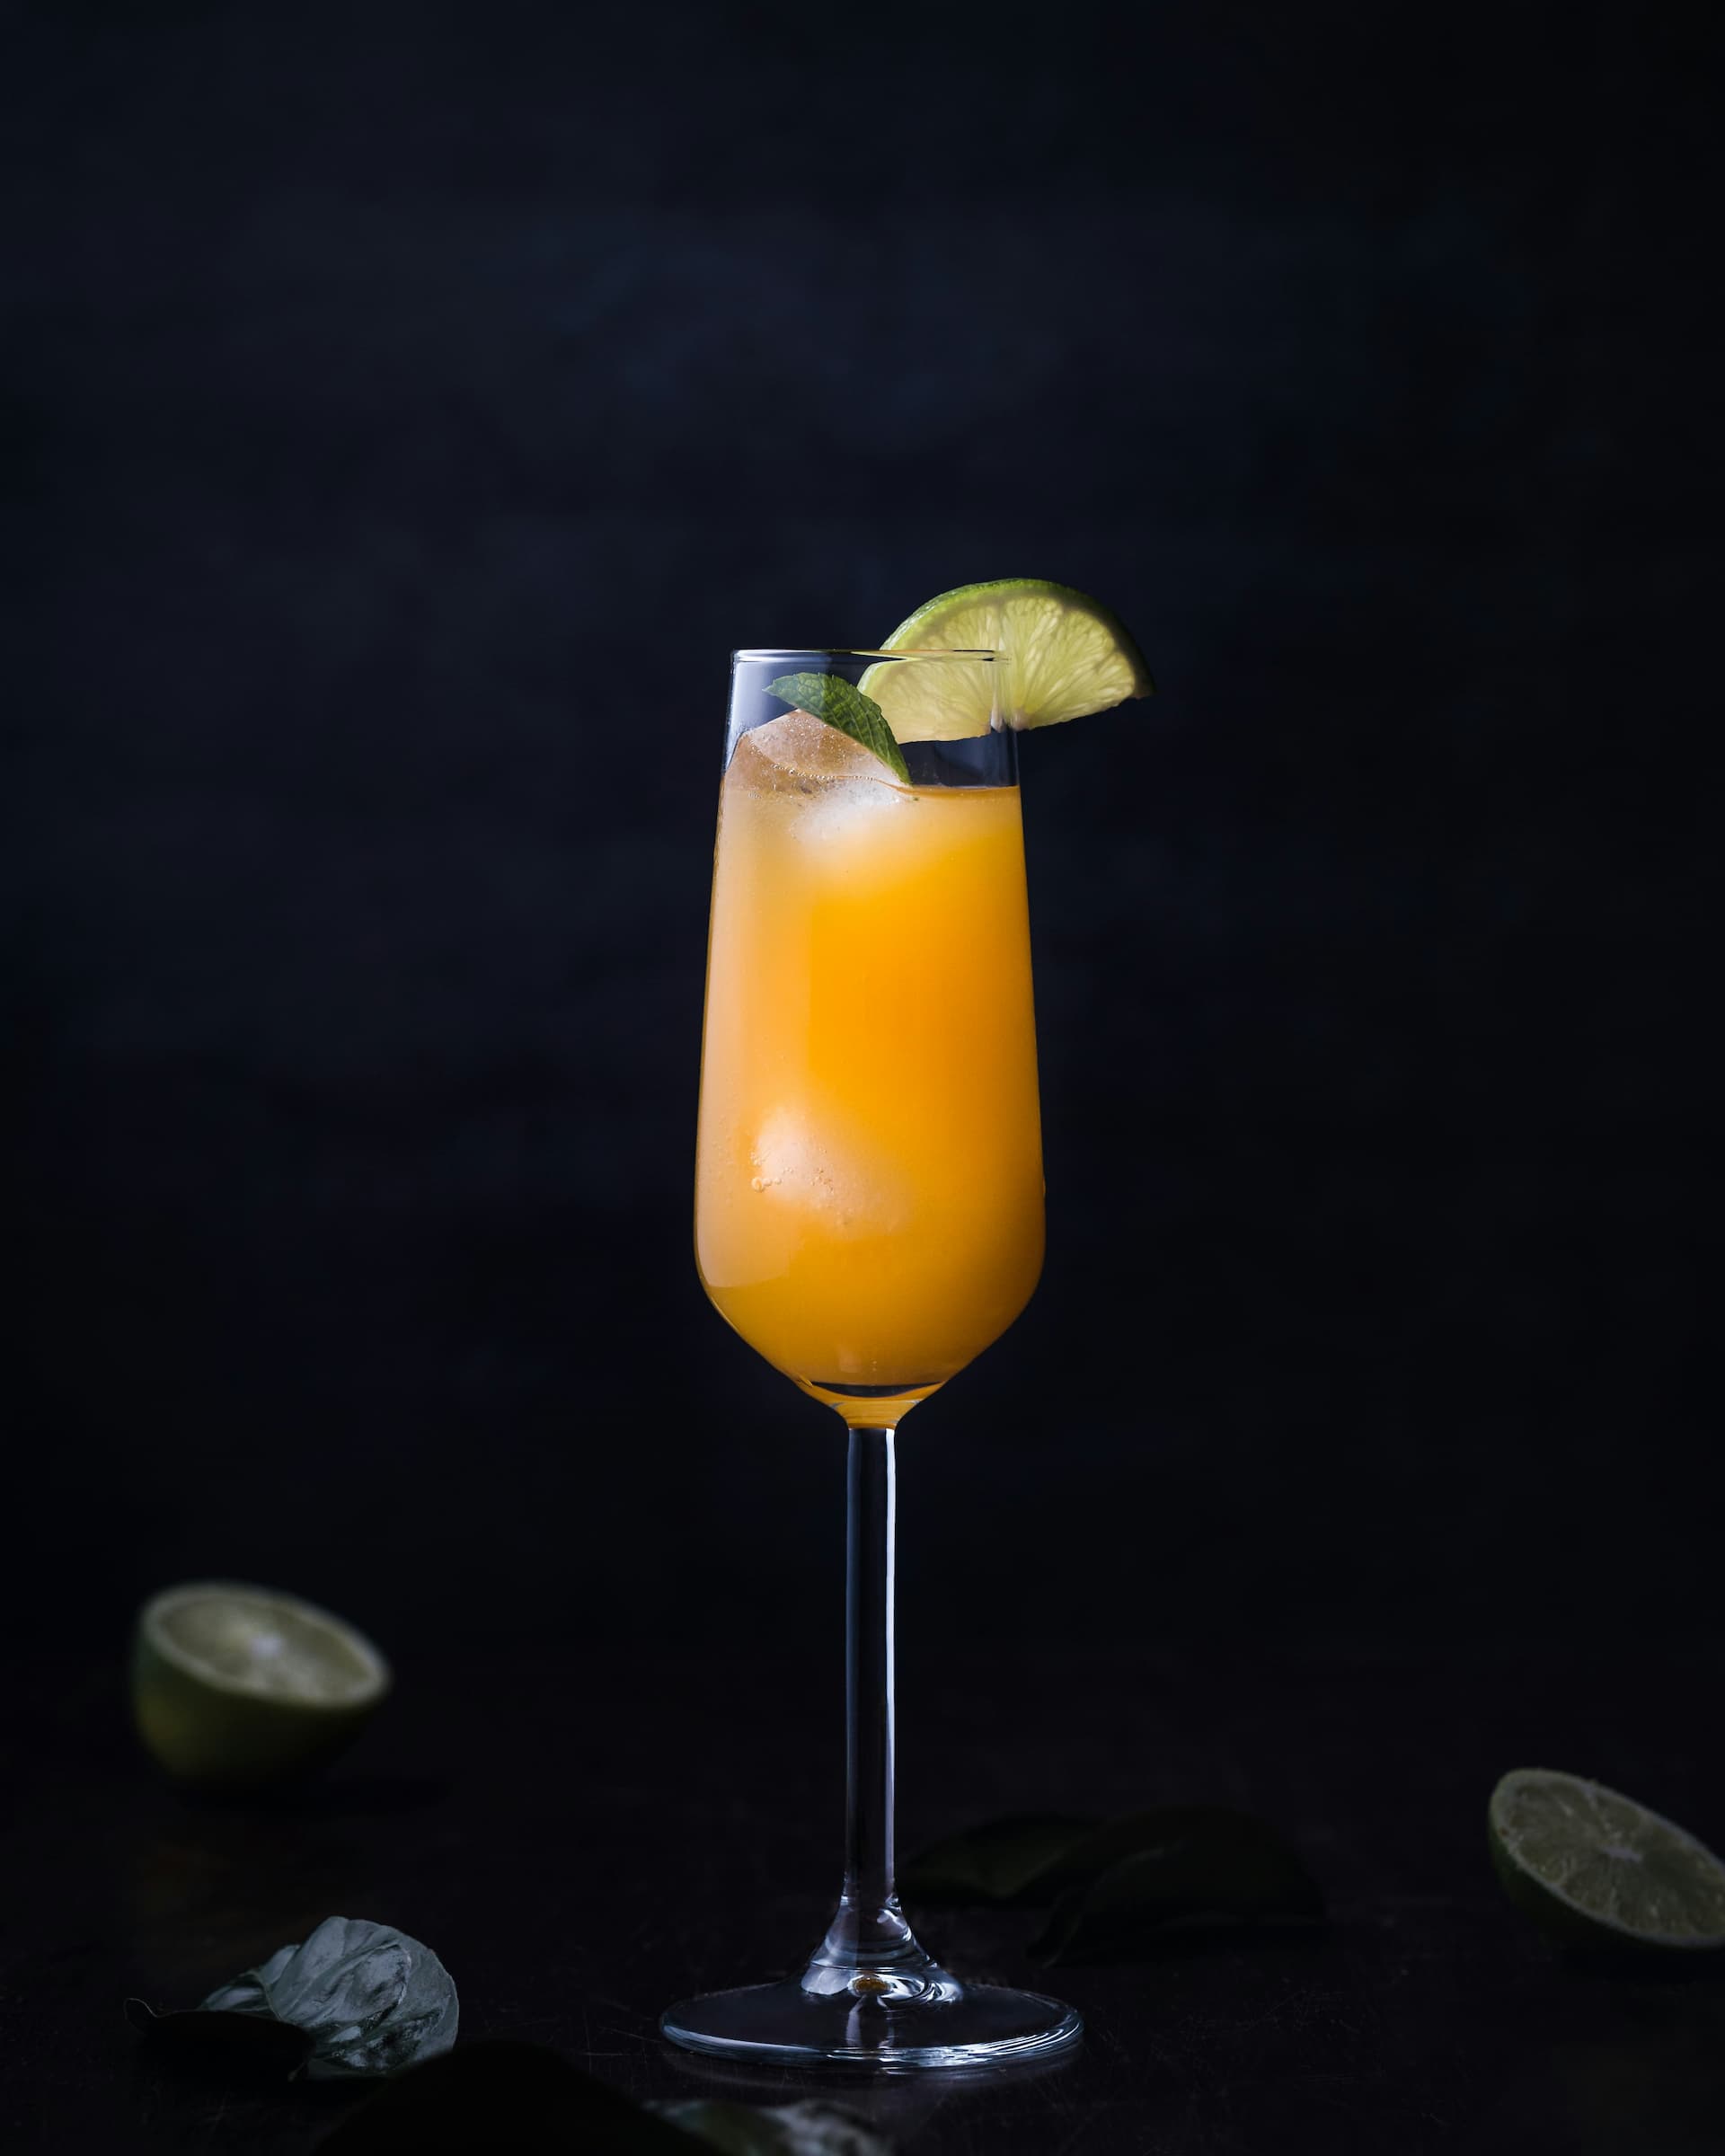 Tequila Sunrise To Sunset: Six Cocktails For An All-Day Wedding Party